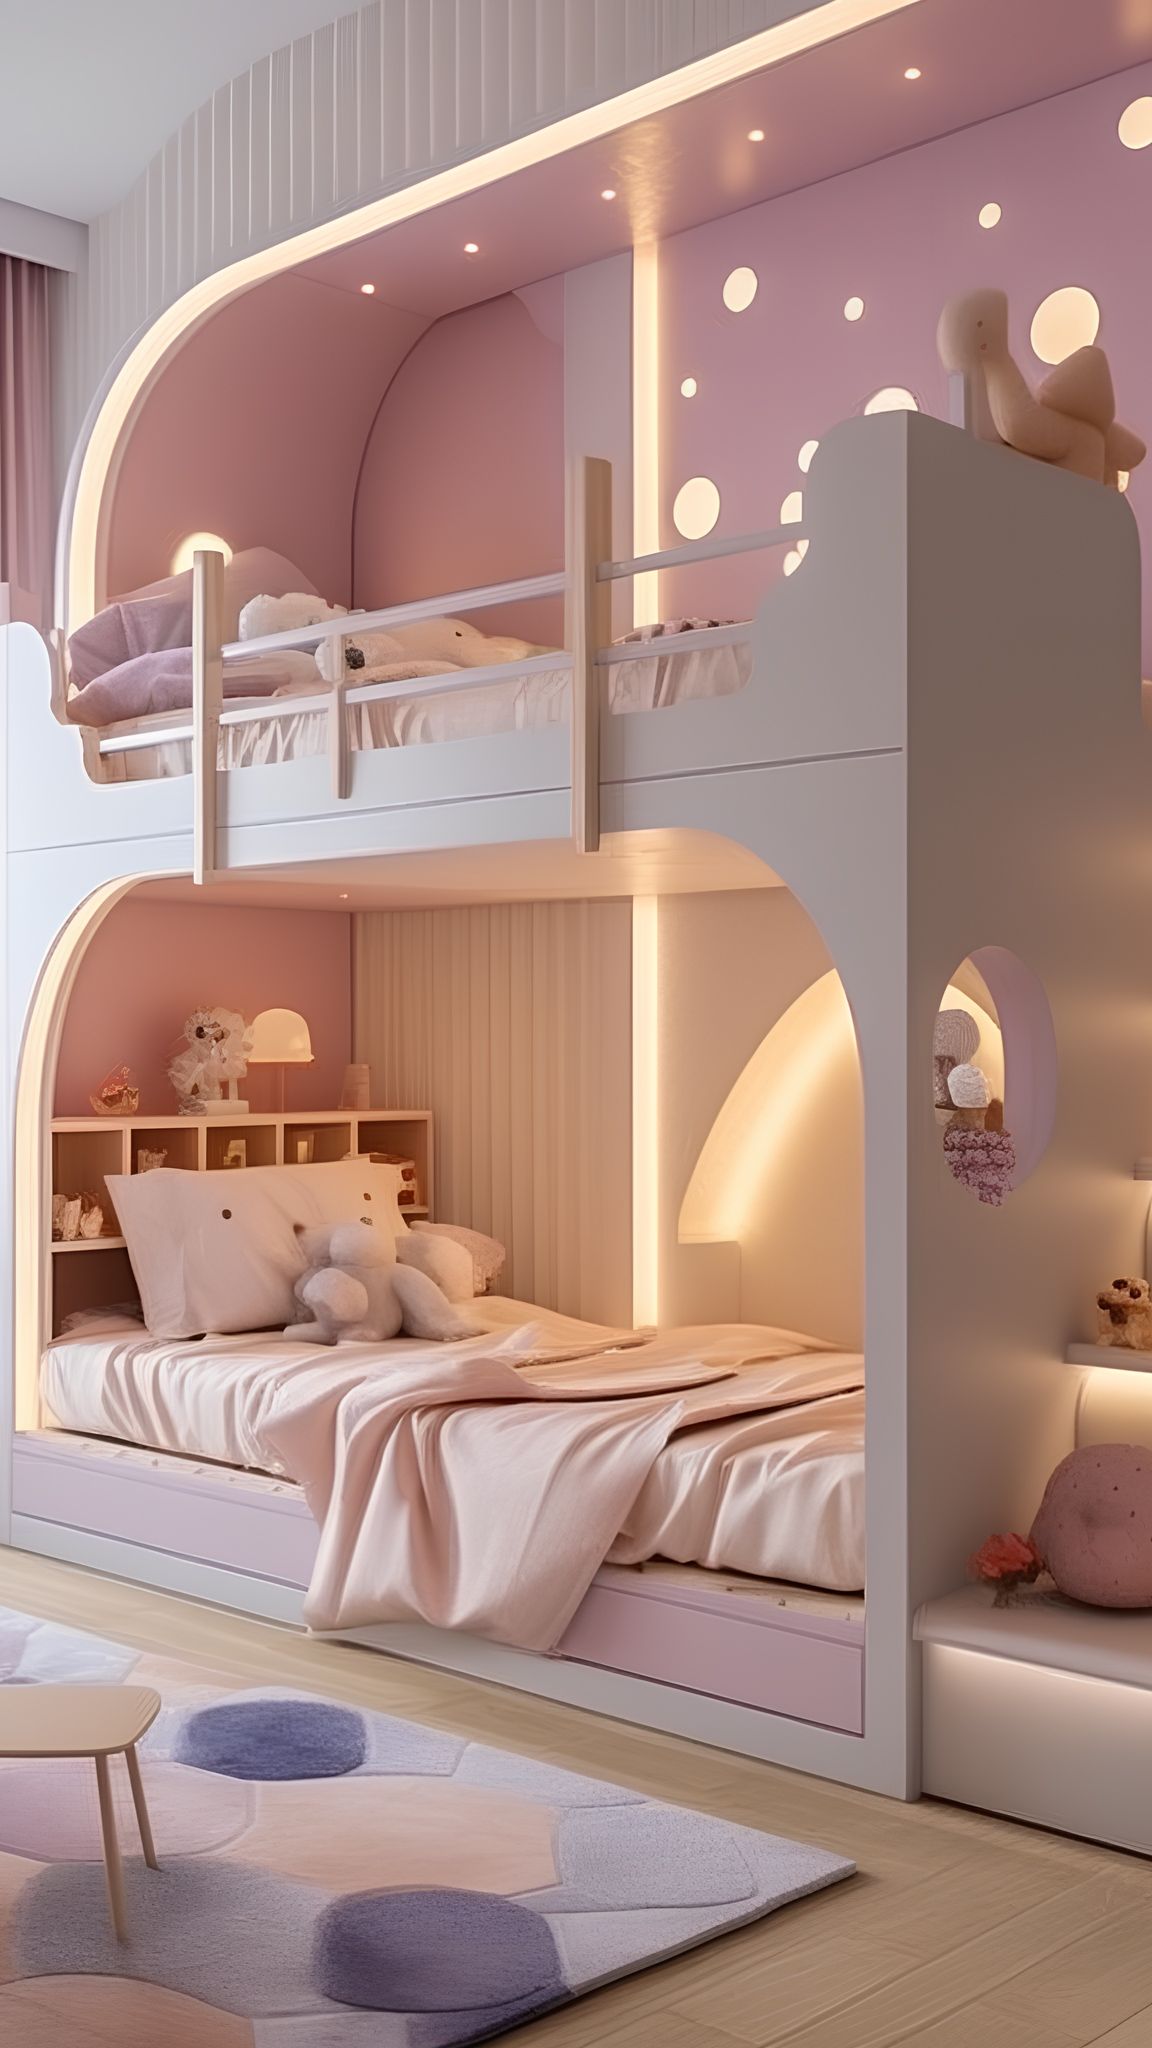 Bunk Beds For Kids